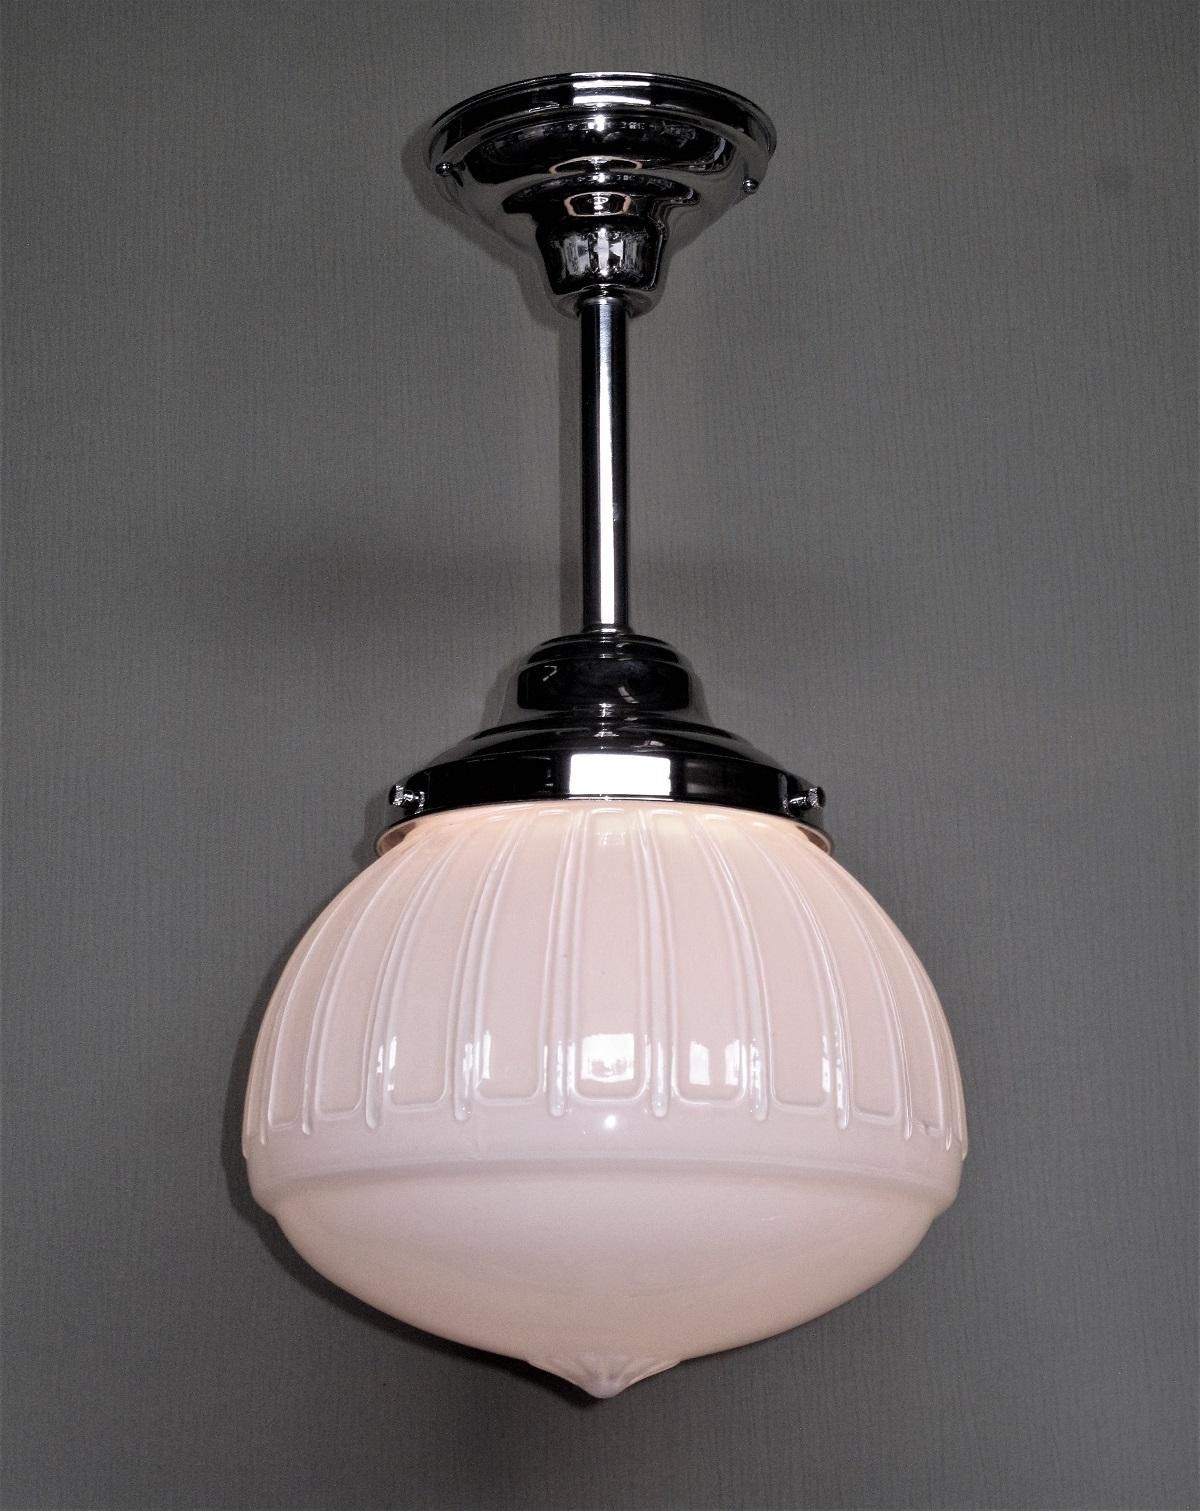 Very pleasing design.
Early commercial globe shown on new polished Nickel fitters. The globes have a modified Acorn design, including the crown of the acorn showing through the husk. A classic design for today's modern kitchen or master bath, or a